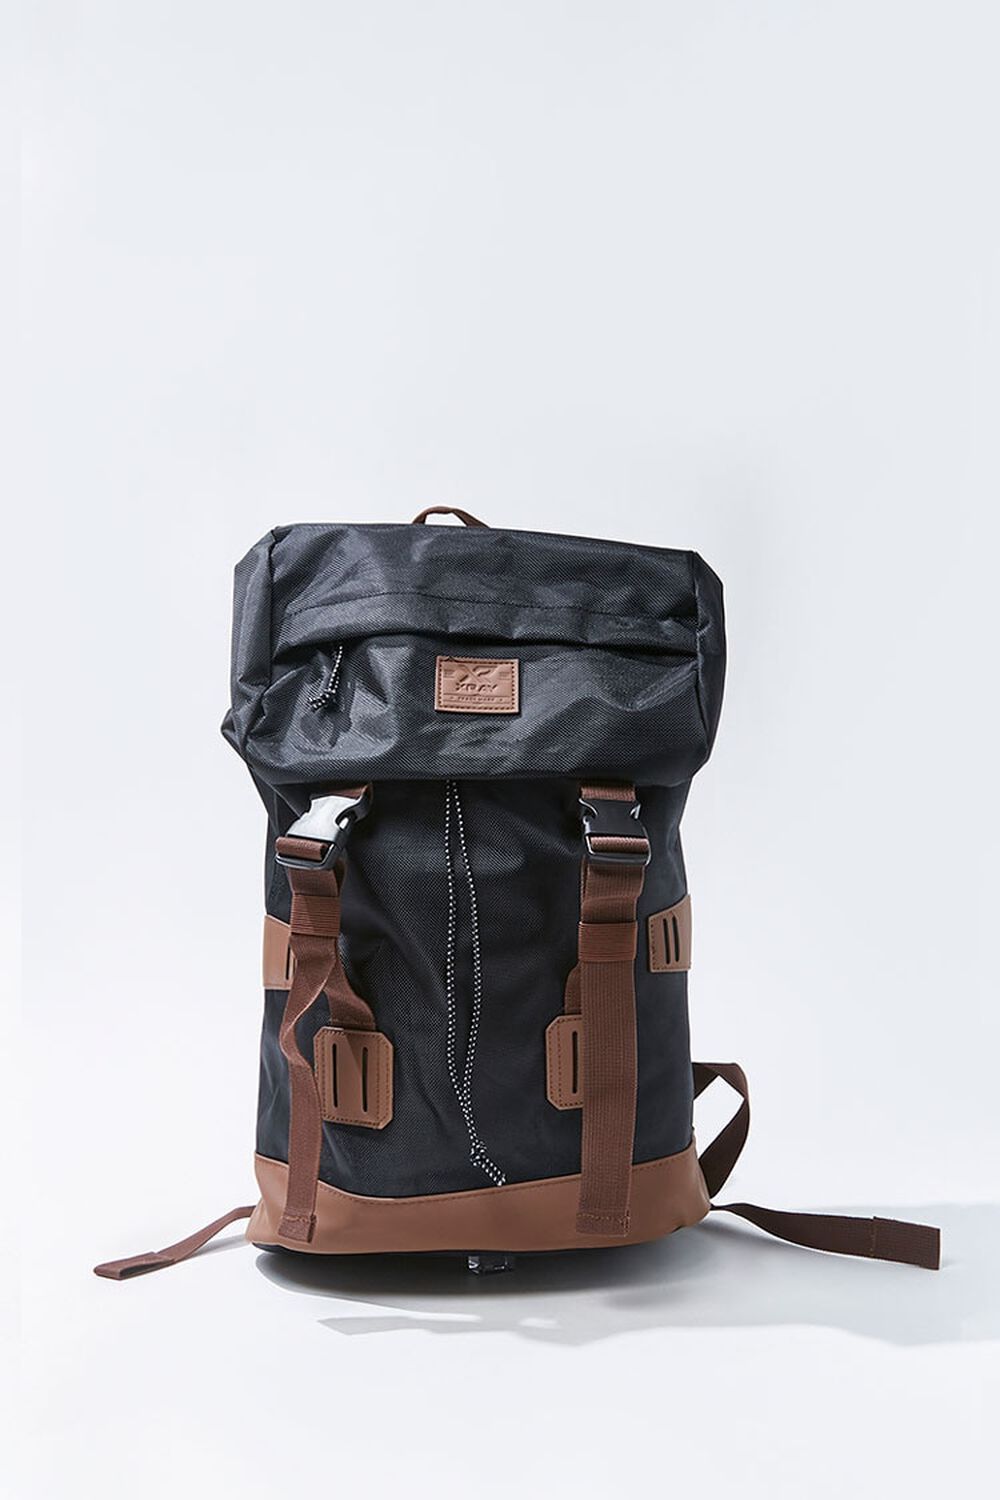 BLACK Xray Men Strappy Backpack, image 1